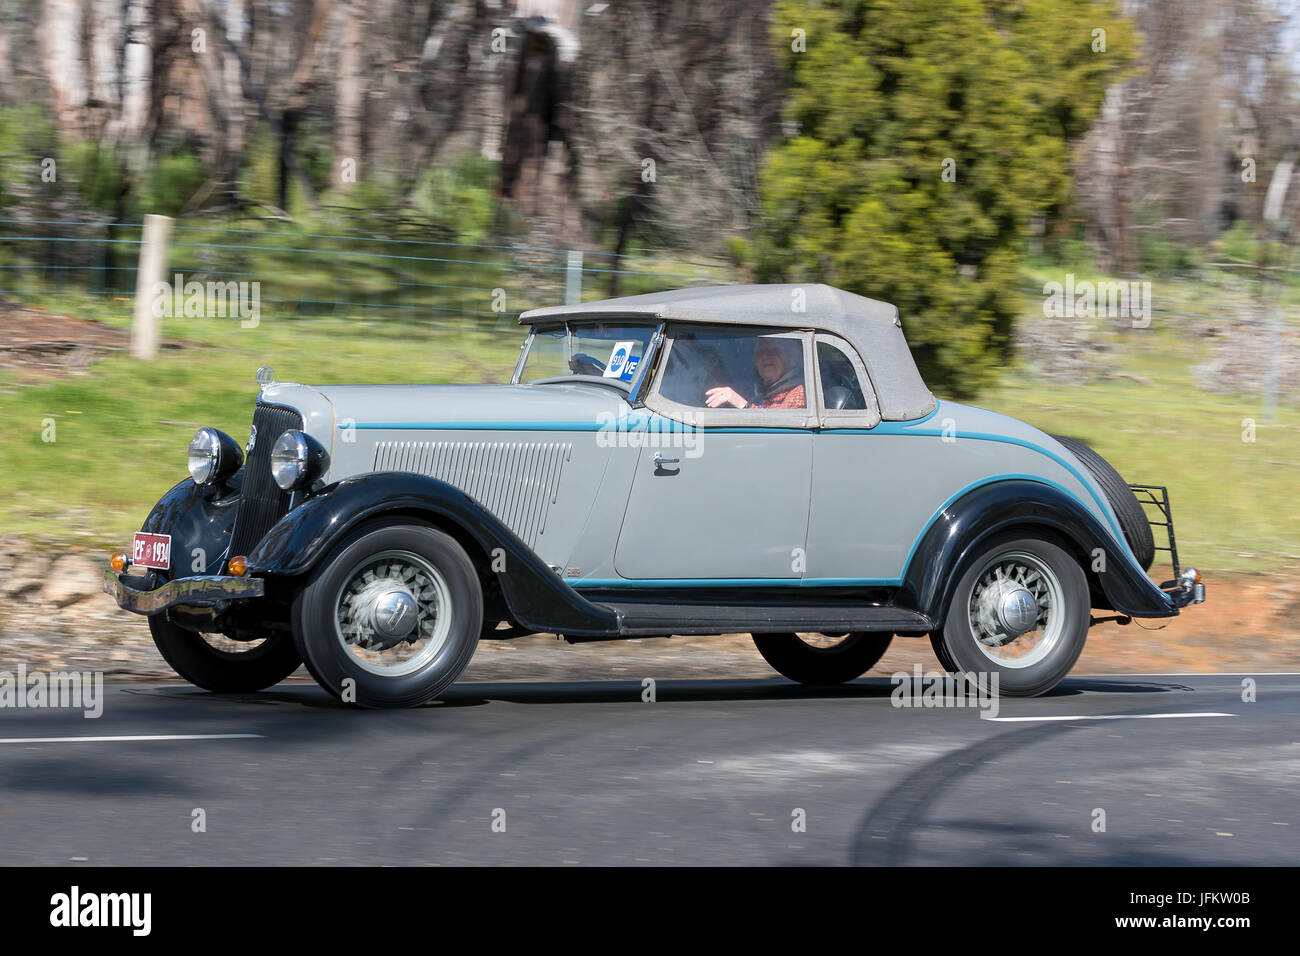 Vintage 1934 Plymouth PF Roadster driving on country roads near the town of Birdwood, South Australia. Stock Photo